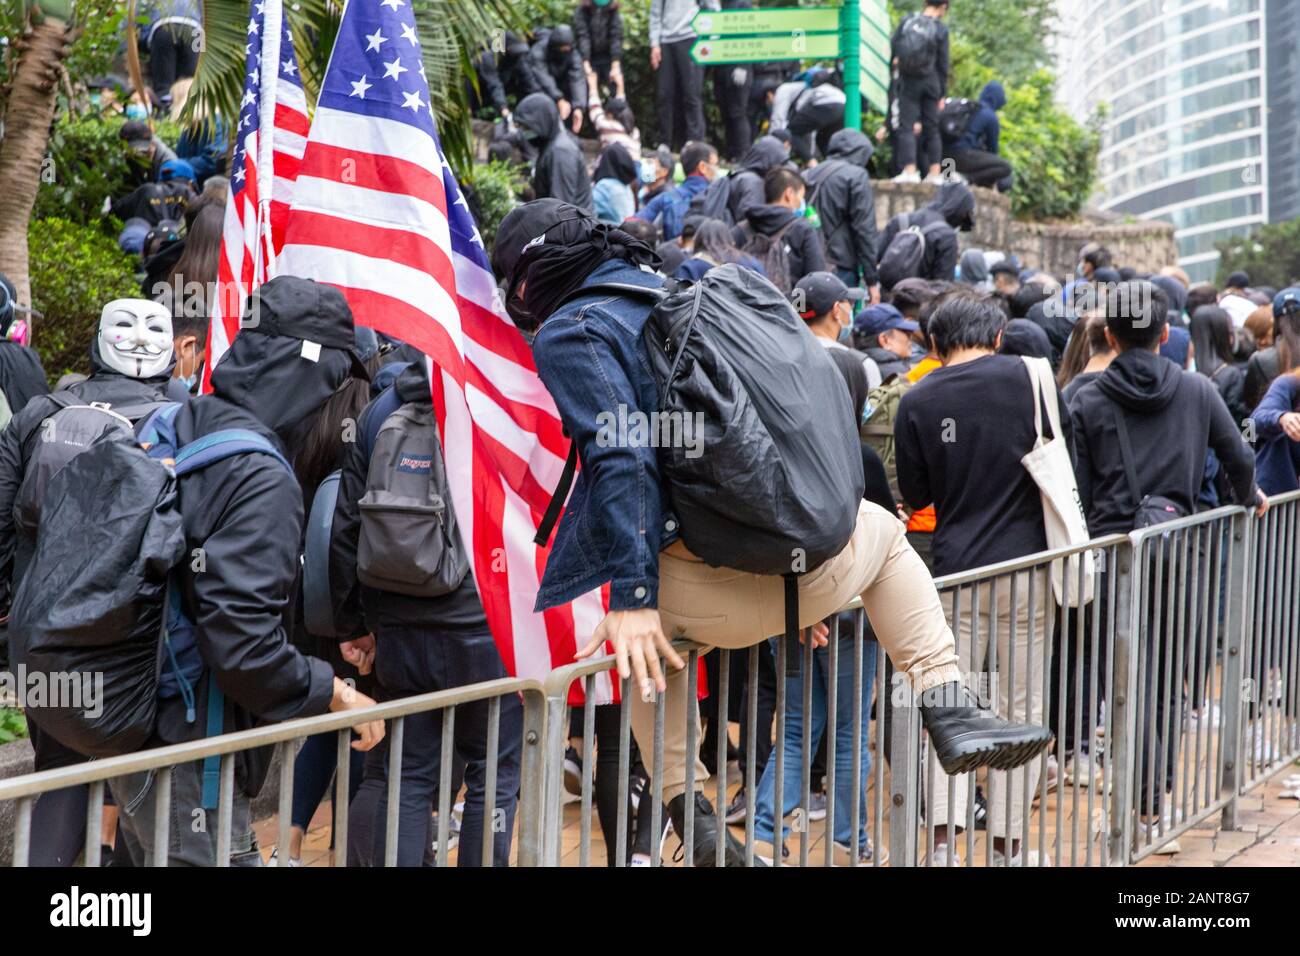 Hong Kong, China. 19th Jan, 2020. Protestors retreating from the police at the Hong Kong Protest - Universal Seige on Communists Rally at Chater Garden, Central, Hong Kong. Credit: David Ogg/Alamy Live News Stock Photo